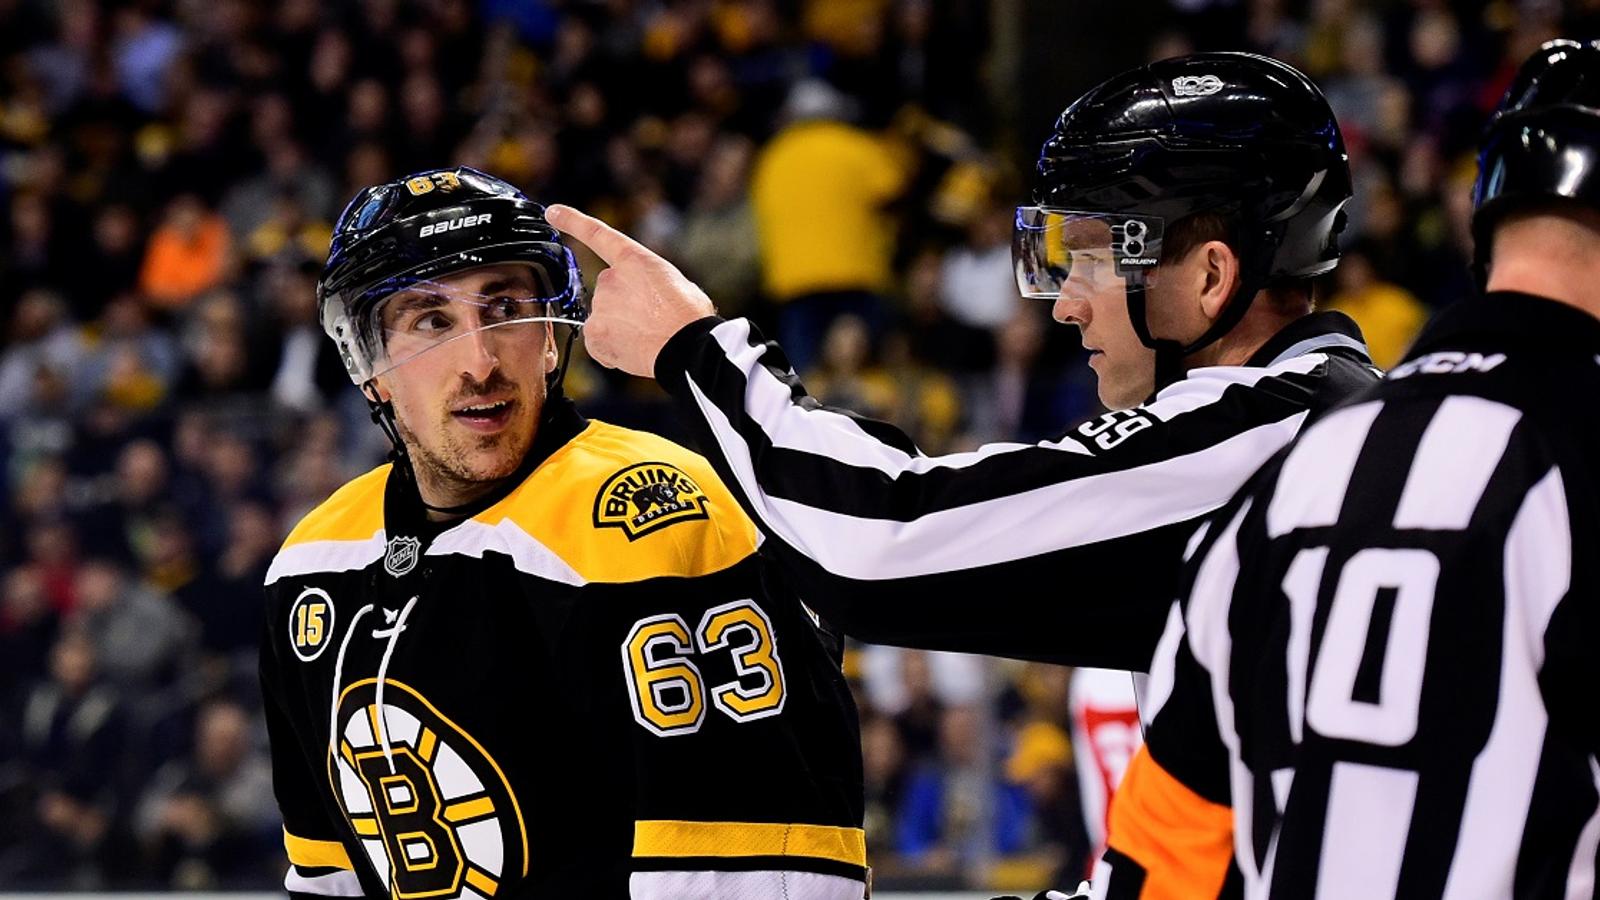 NHL Player Safety comes down on Brad Marchand.